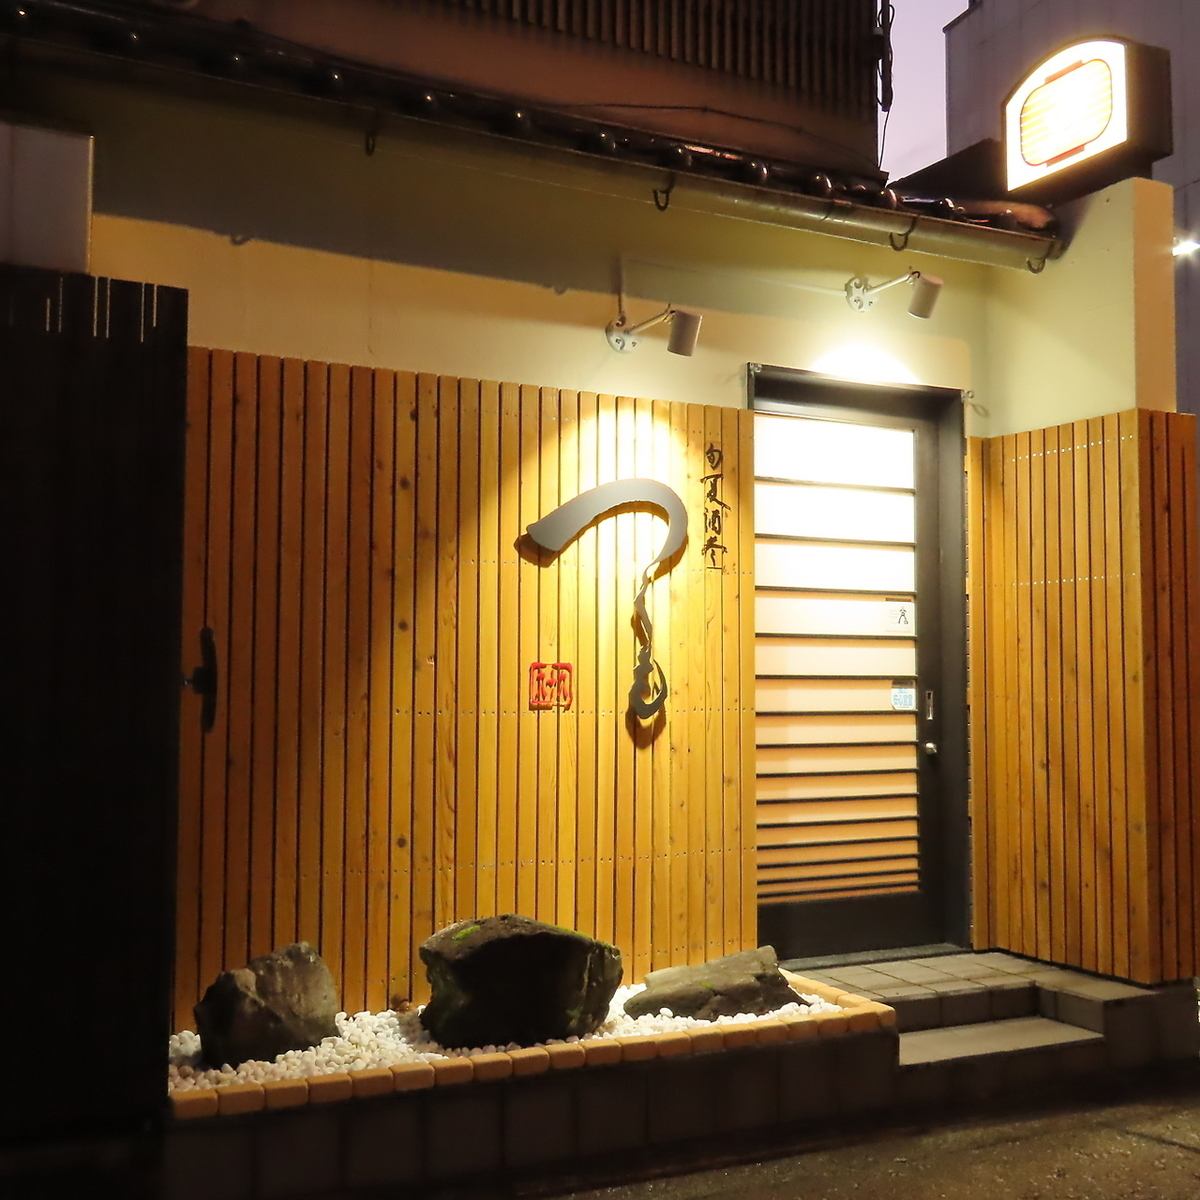 We are proud of Kanazawa Oden and seafood dishes★We are open until 24:00♪